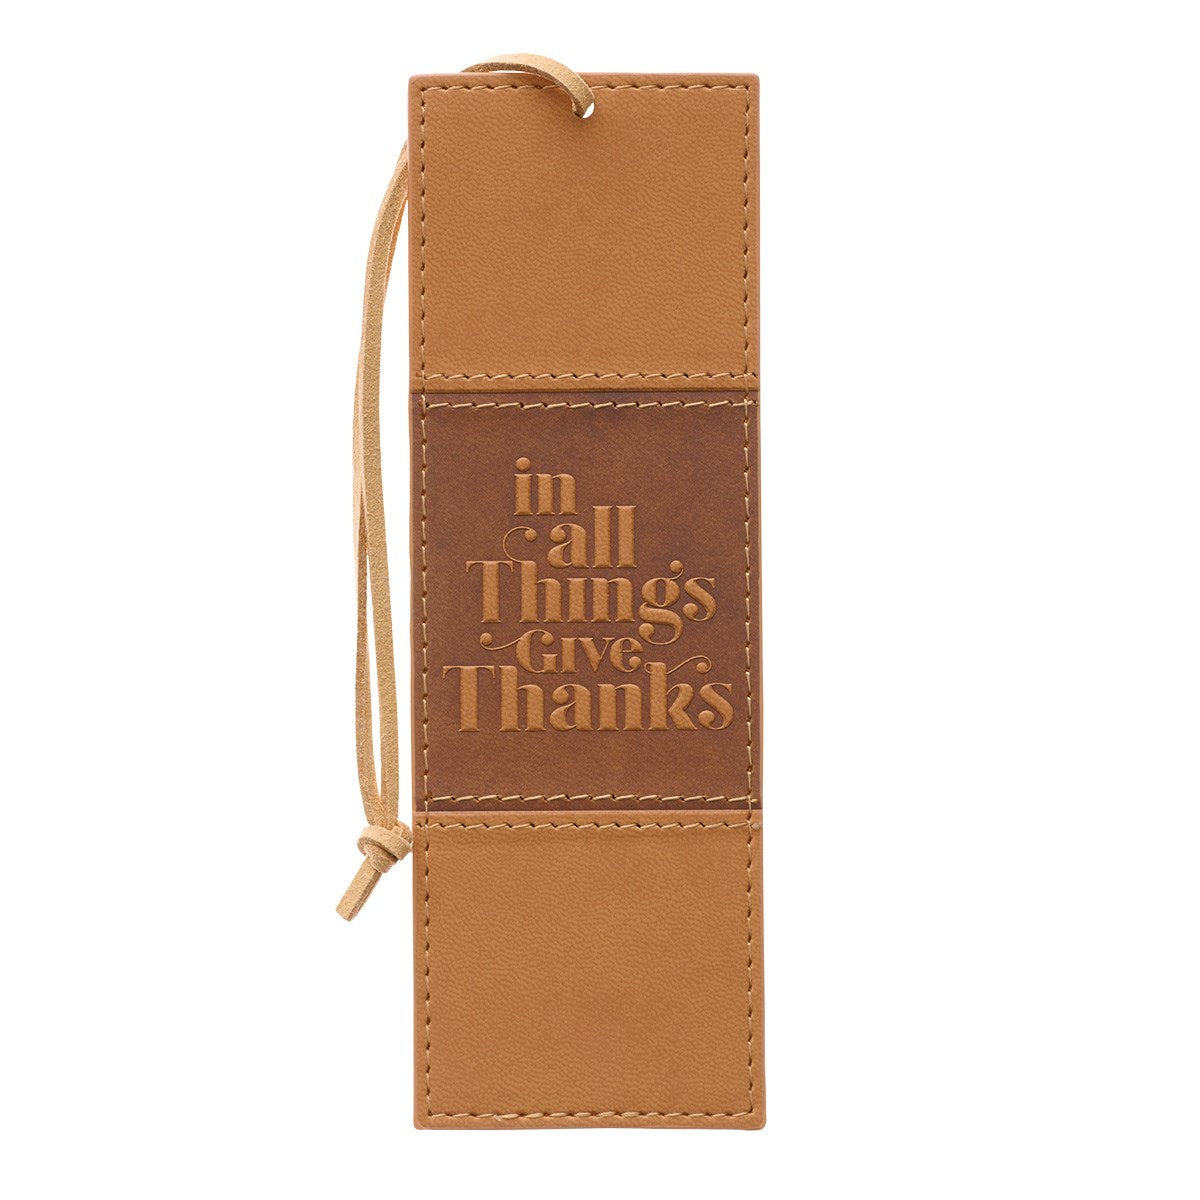 Bookmark-Pagemarker-In All Things Give Thanks-Luxleather-Brown